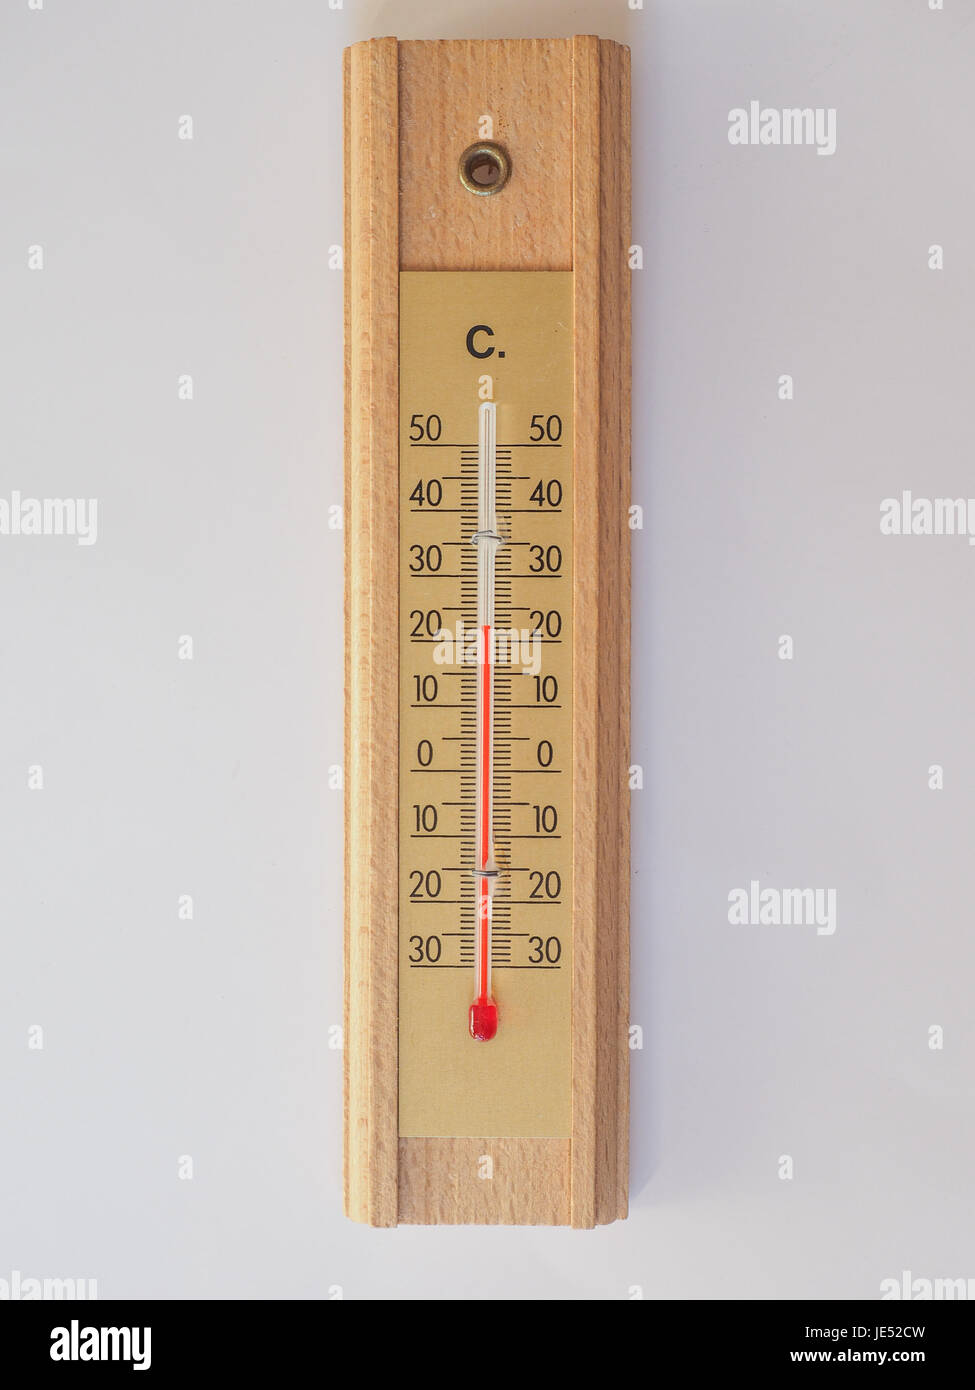 https://c8.alamy.com/comp/JE52CW/thermometer-thermostat-instrument-to-measure-air-temperature-JE52CW.jpg